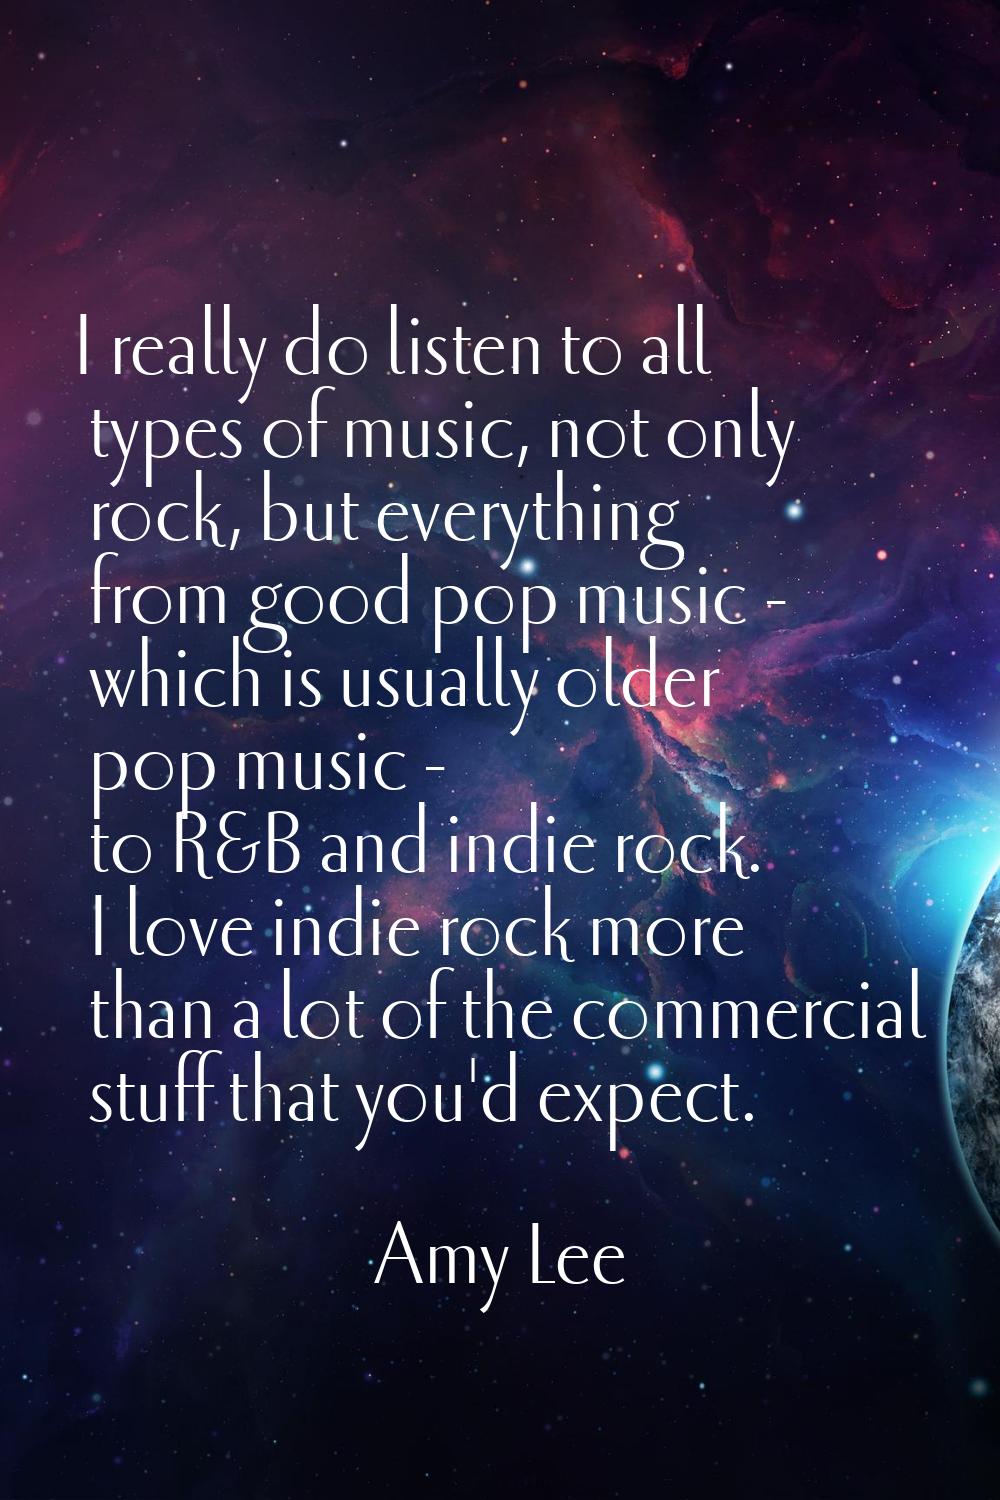 I really do listen to all types of music, not only rock, but everything from good pop music - which